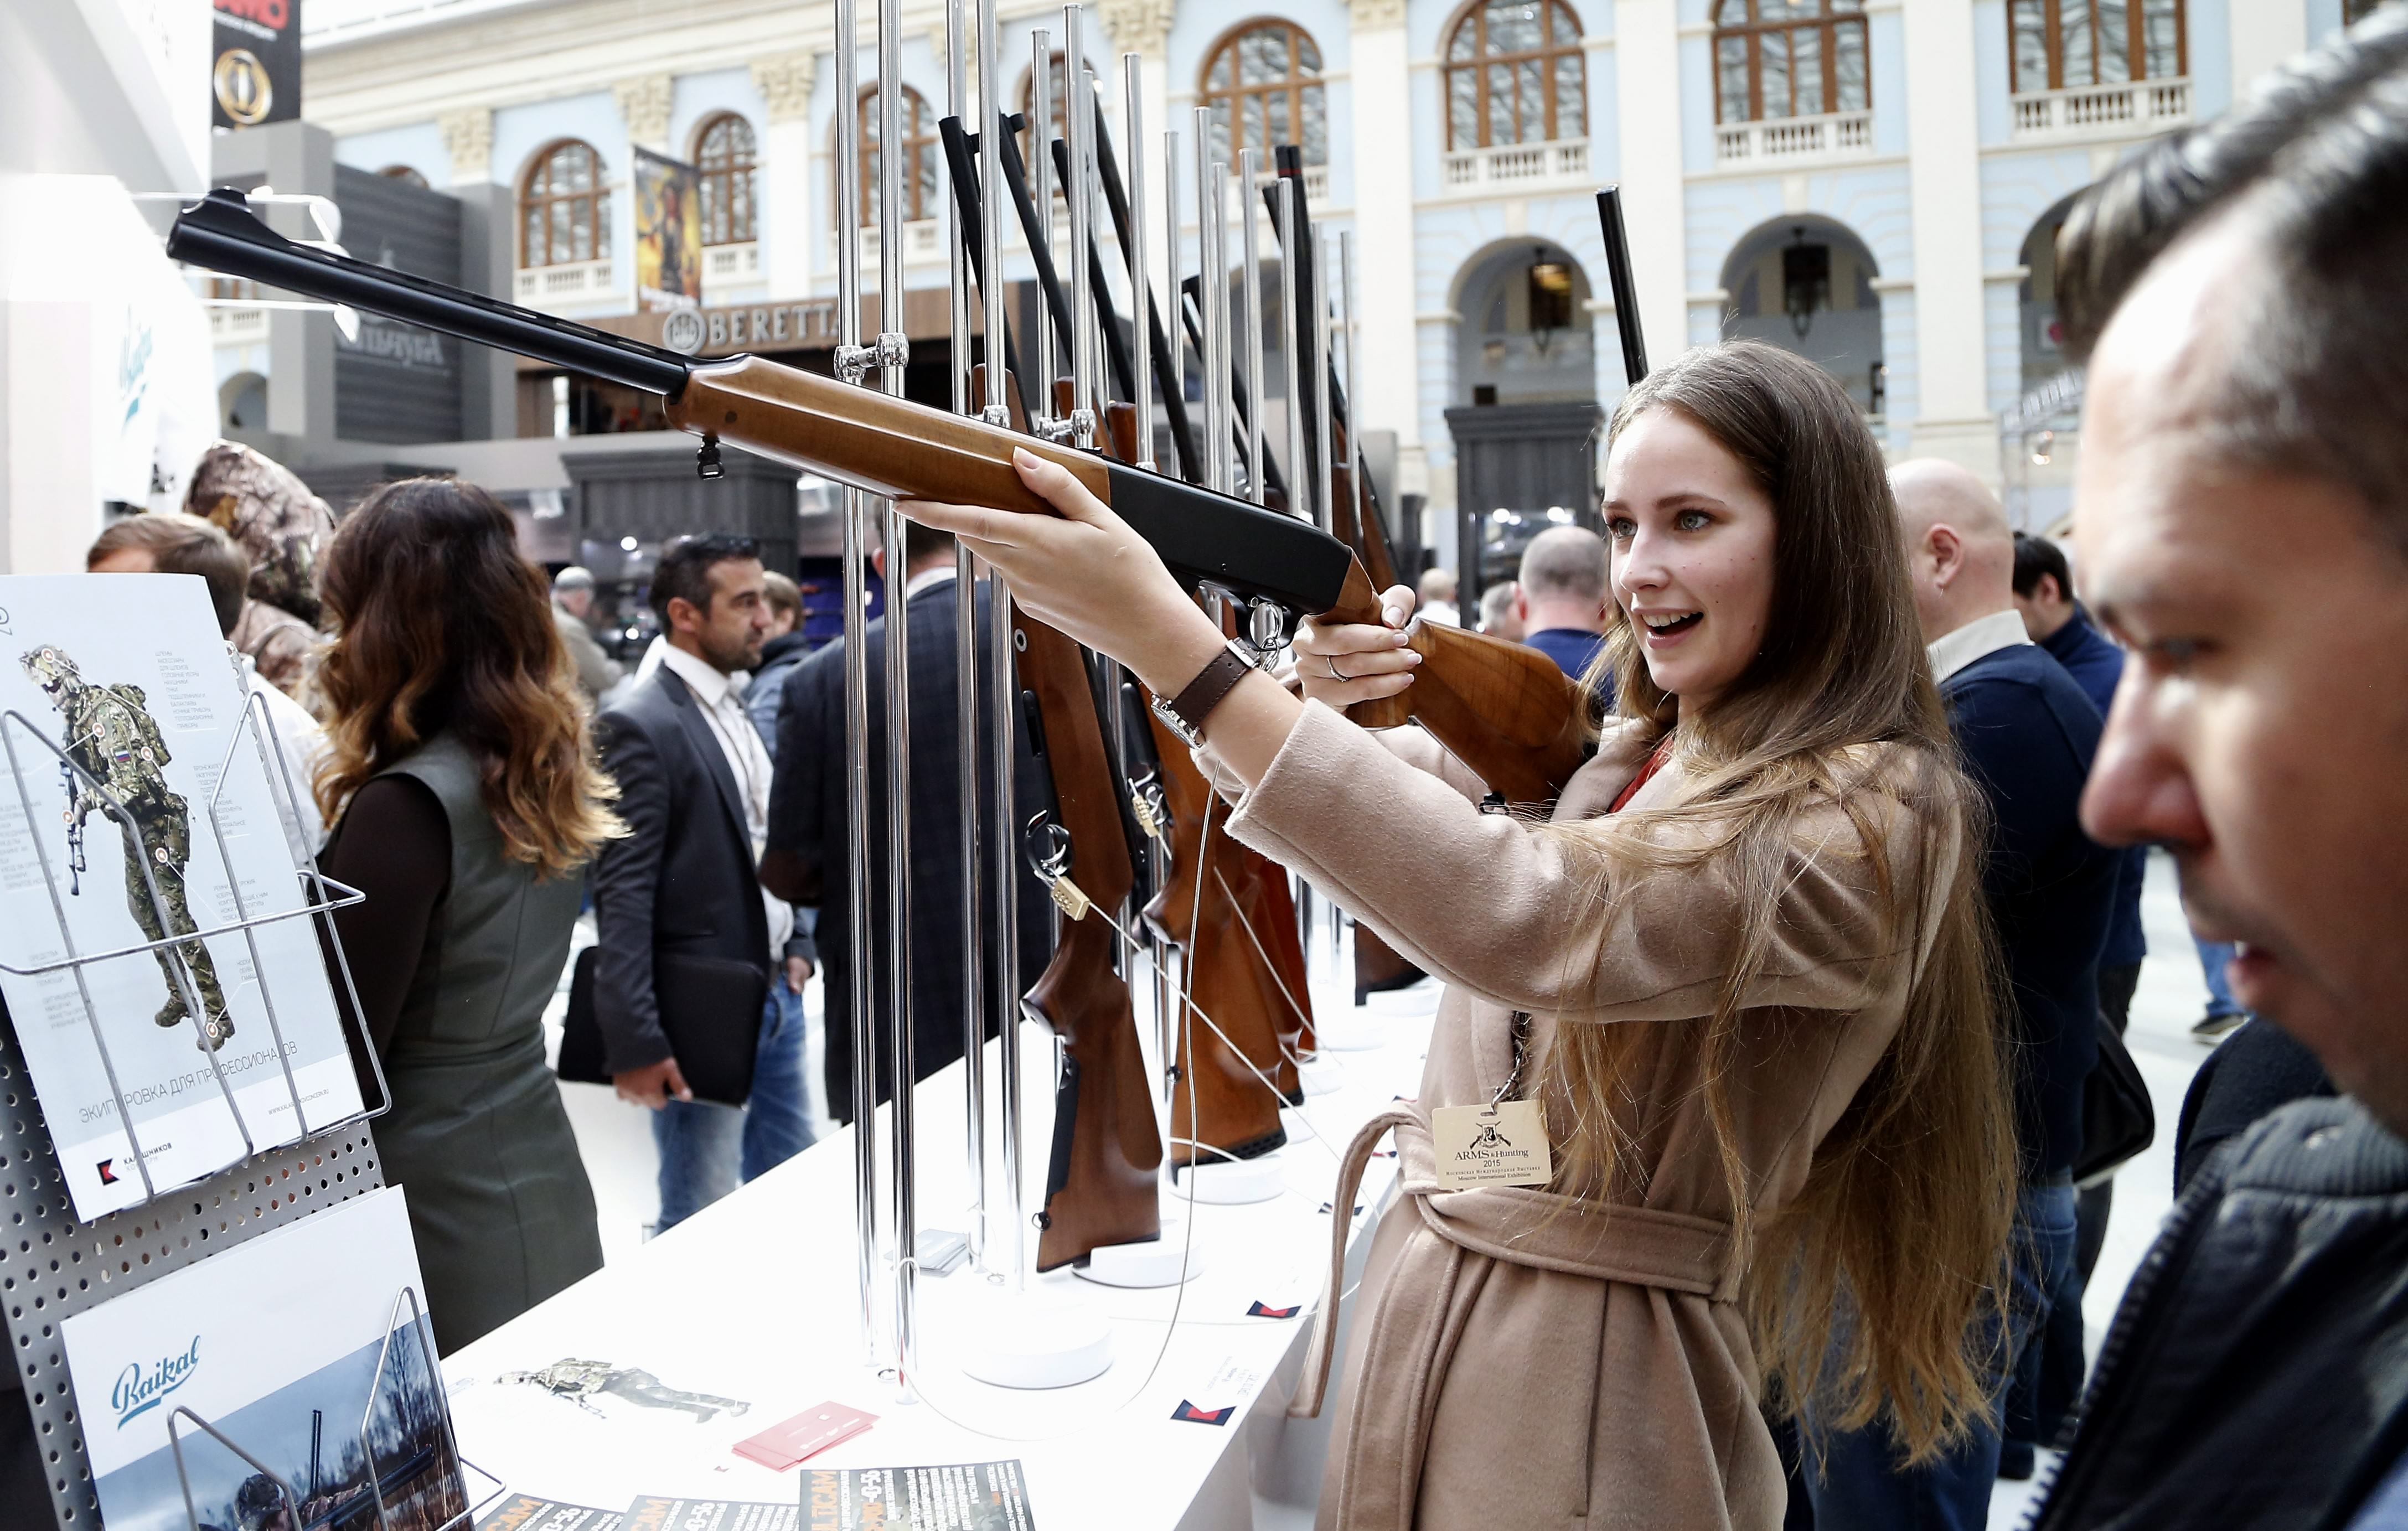 A visitor aims with a rifle on display at the Kalashnikov Grouppavilion during the ARMS & Hunting 2015 International Exhibition atthe Gostinniy Dvor exhibition centre in Moscow, Russia.